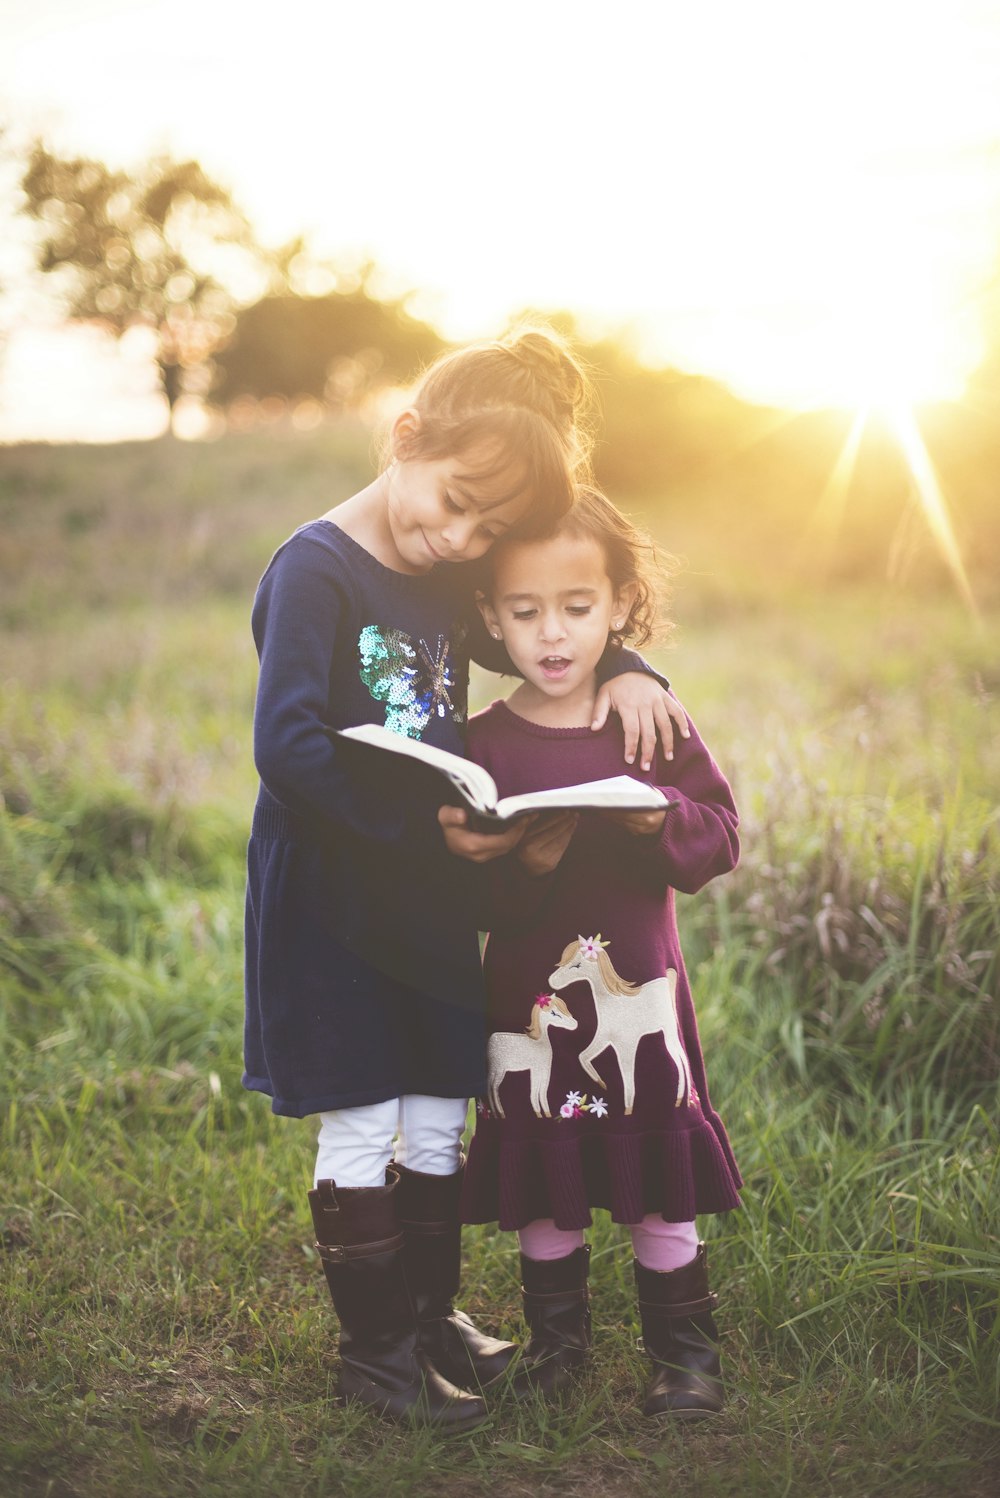 Moral Stories: Here’s How To Motivate Your Kids Using Stories